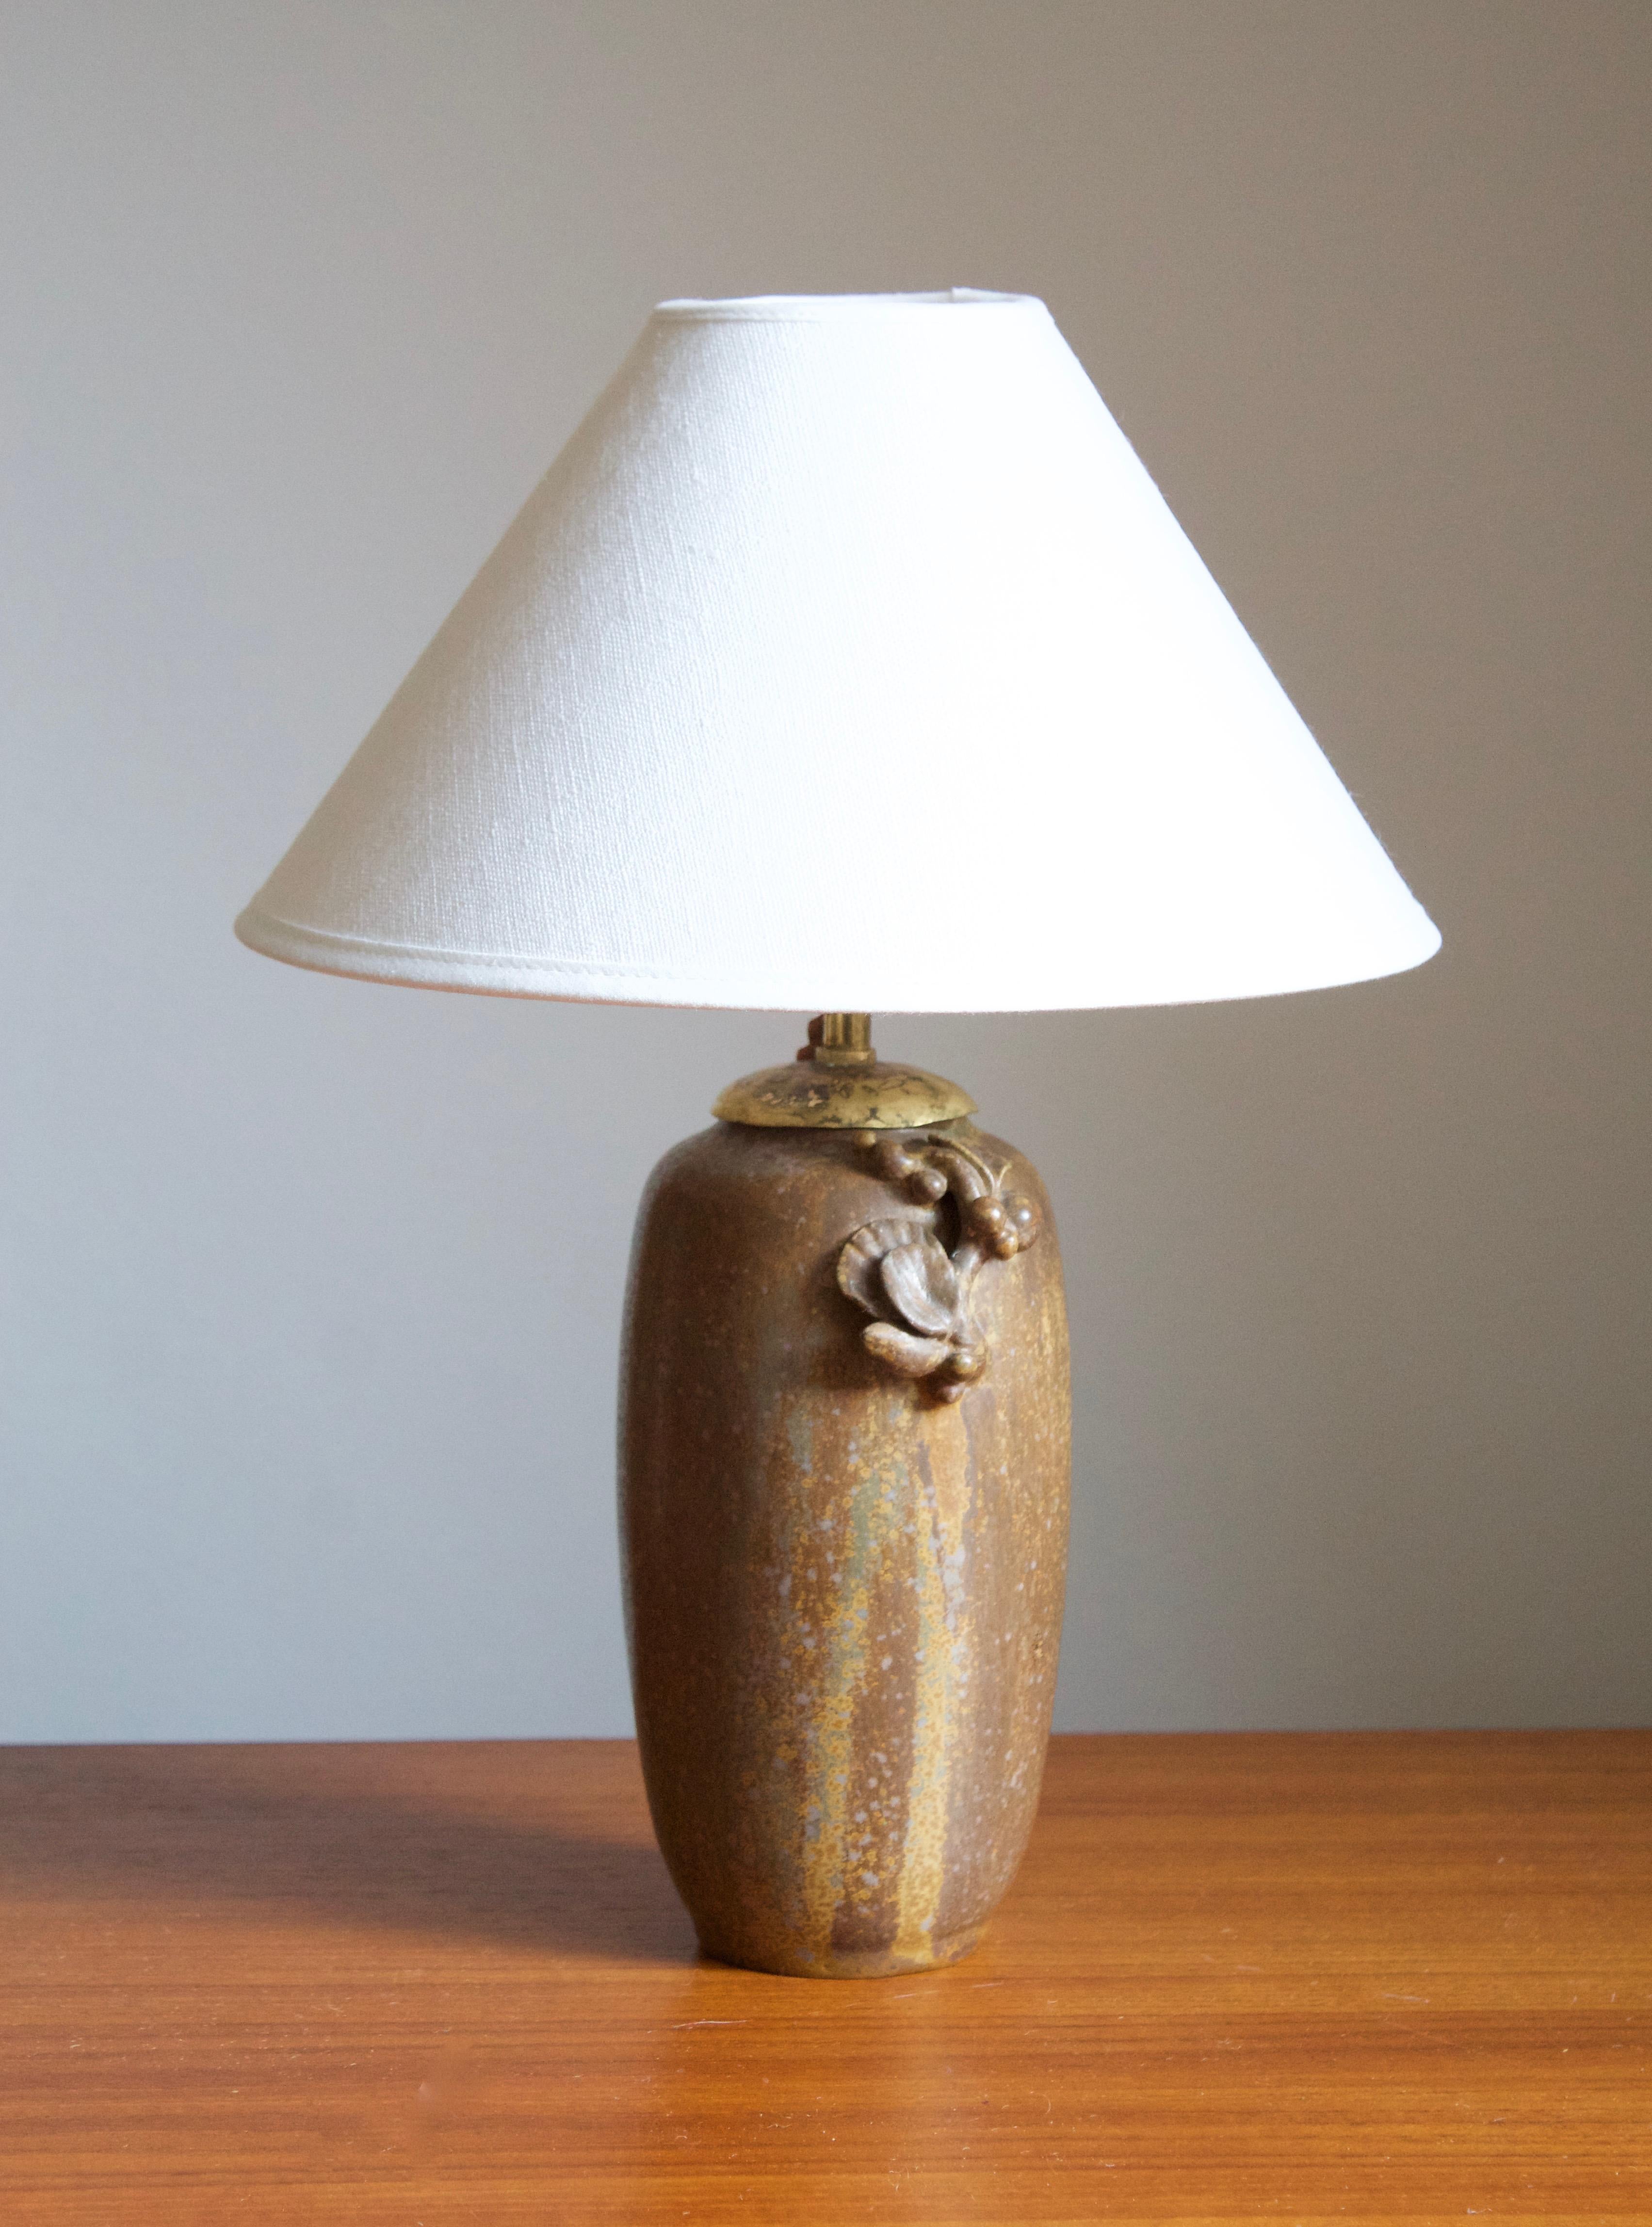 A table lamp. Designed by Arne Bang, produced, c. 1927. Glazed stoneware. Features ornamental floral motifs iconic to Bangs production.

Stated dimensions exclude the lampshade. Stated height includes socket. Sold without lampshade.

Other designers